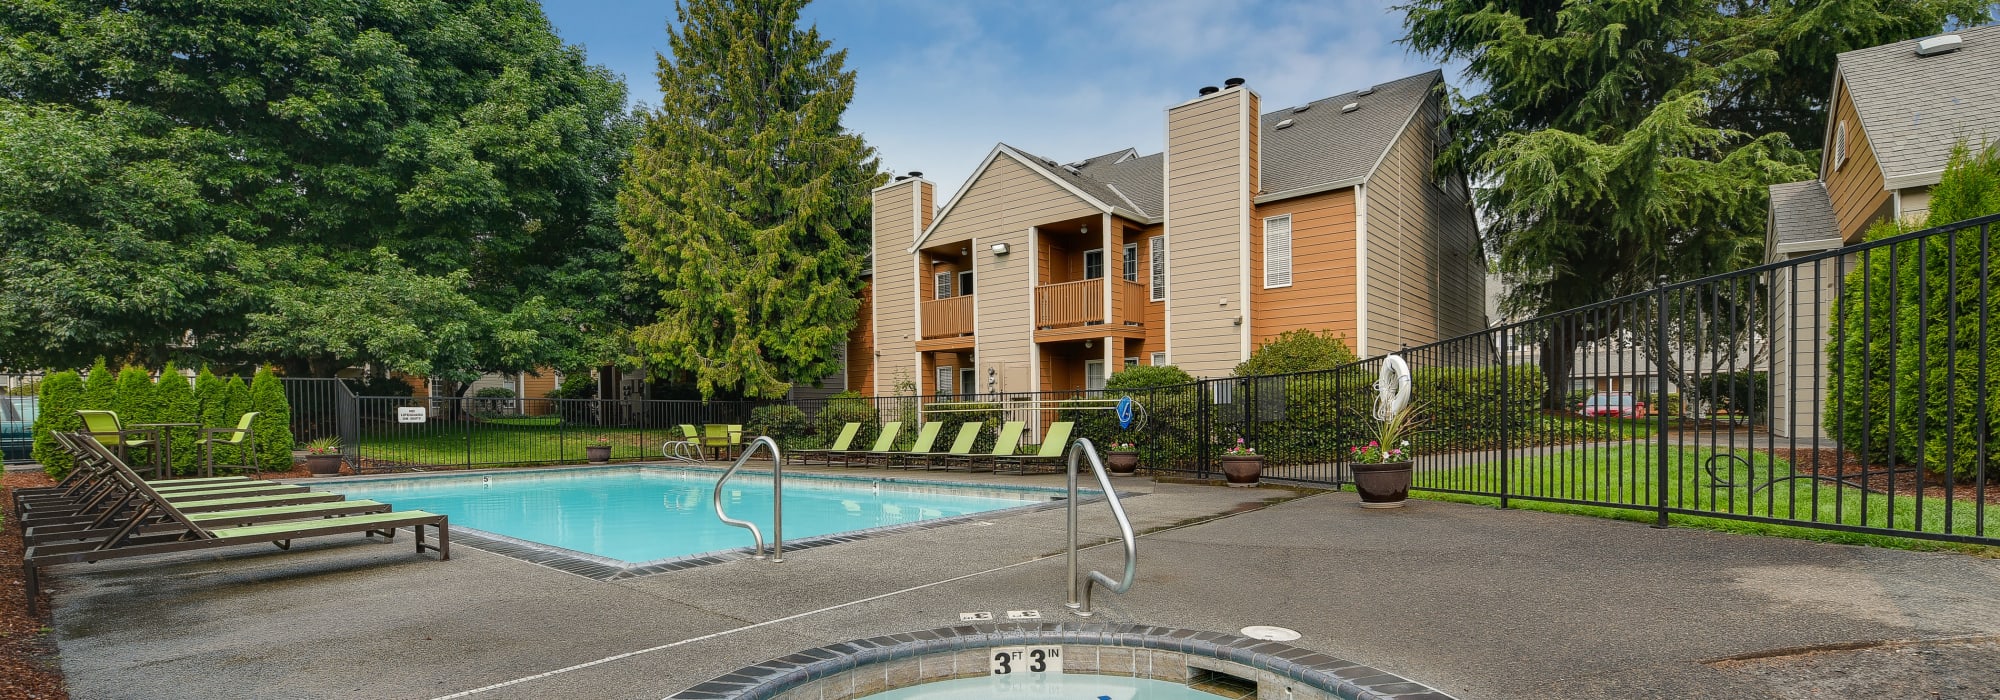 Resident Portal at Carriage House Apartments in Vancouver, Washington